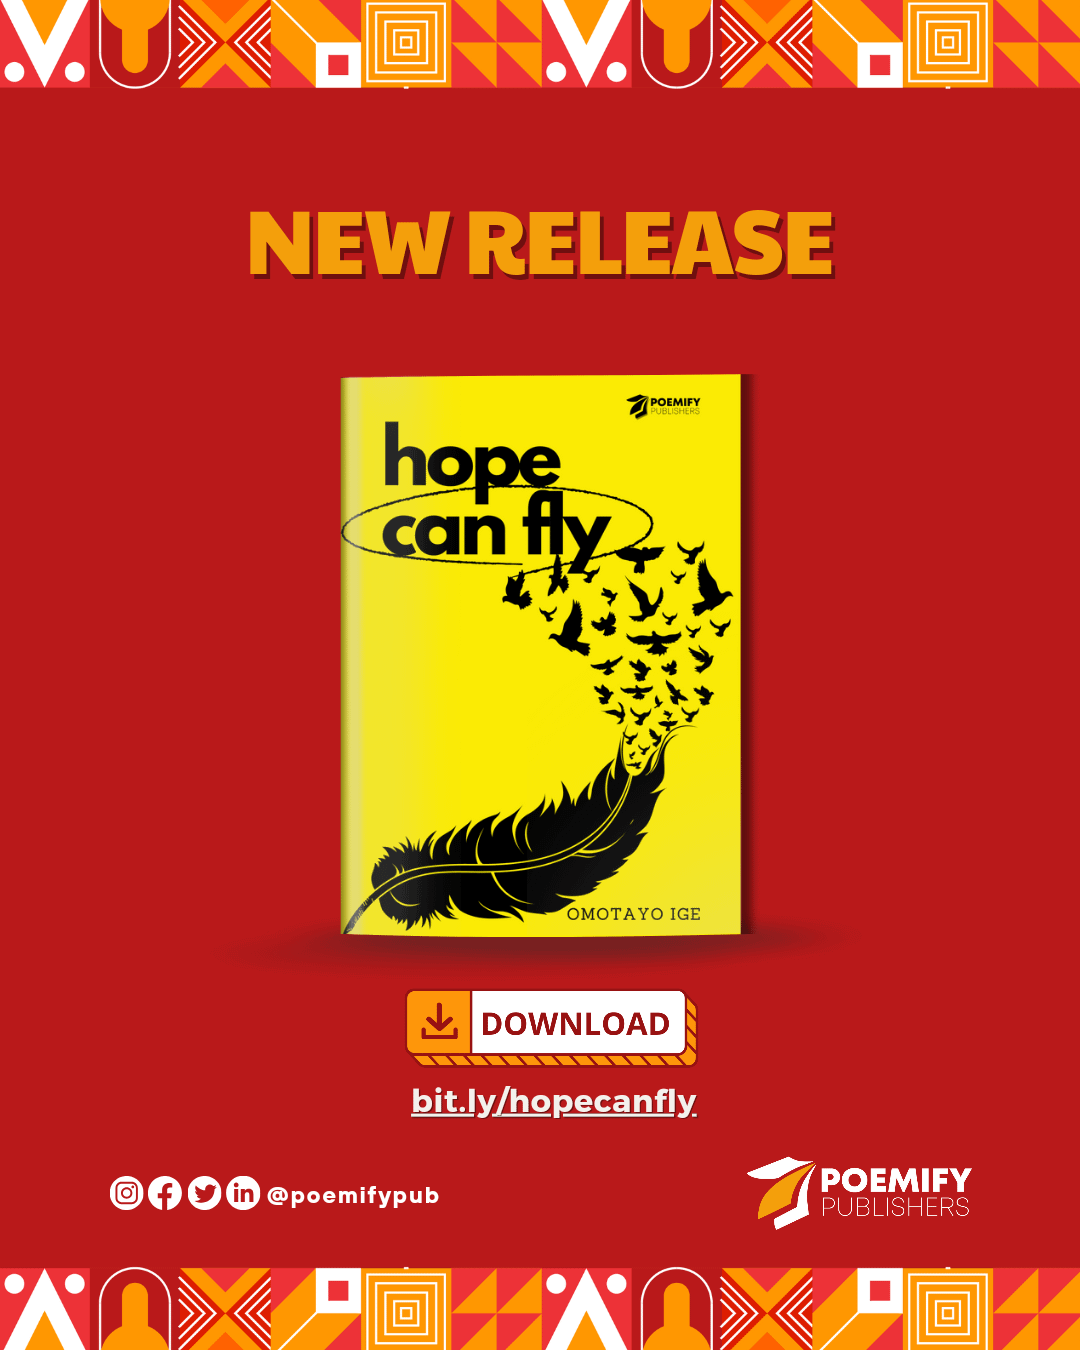 BOOK ALERT: HOPE CAN FLY, BY OMOTAYO IGE